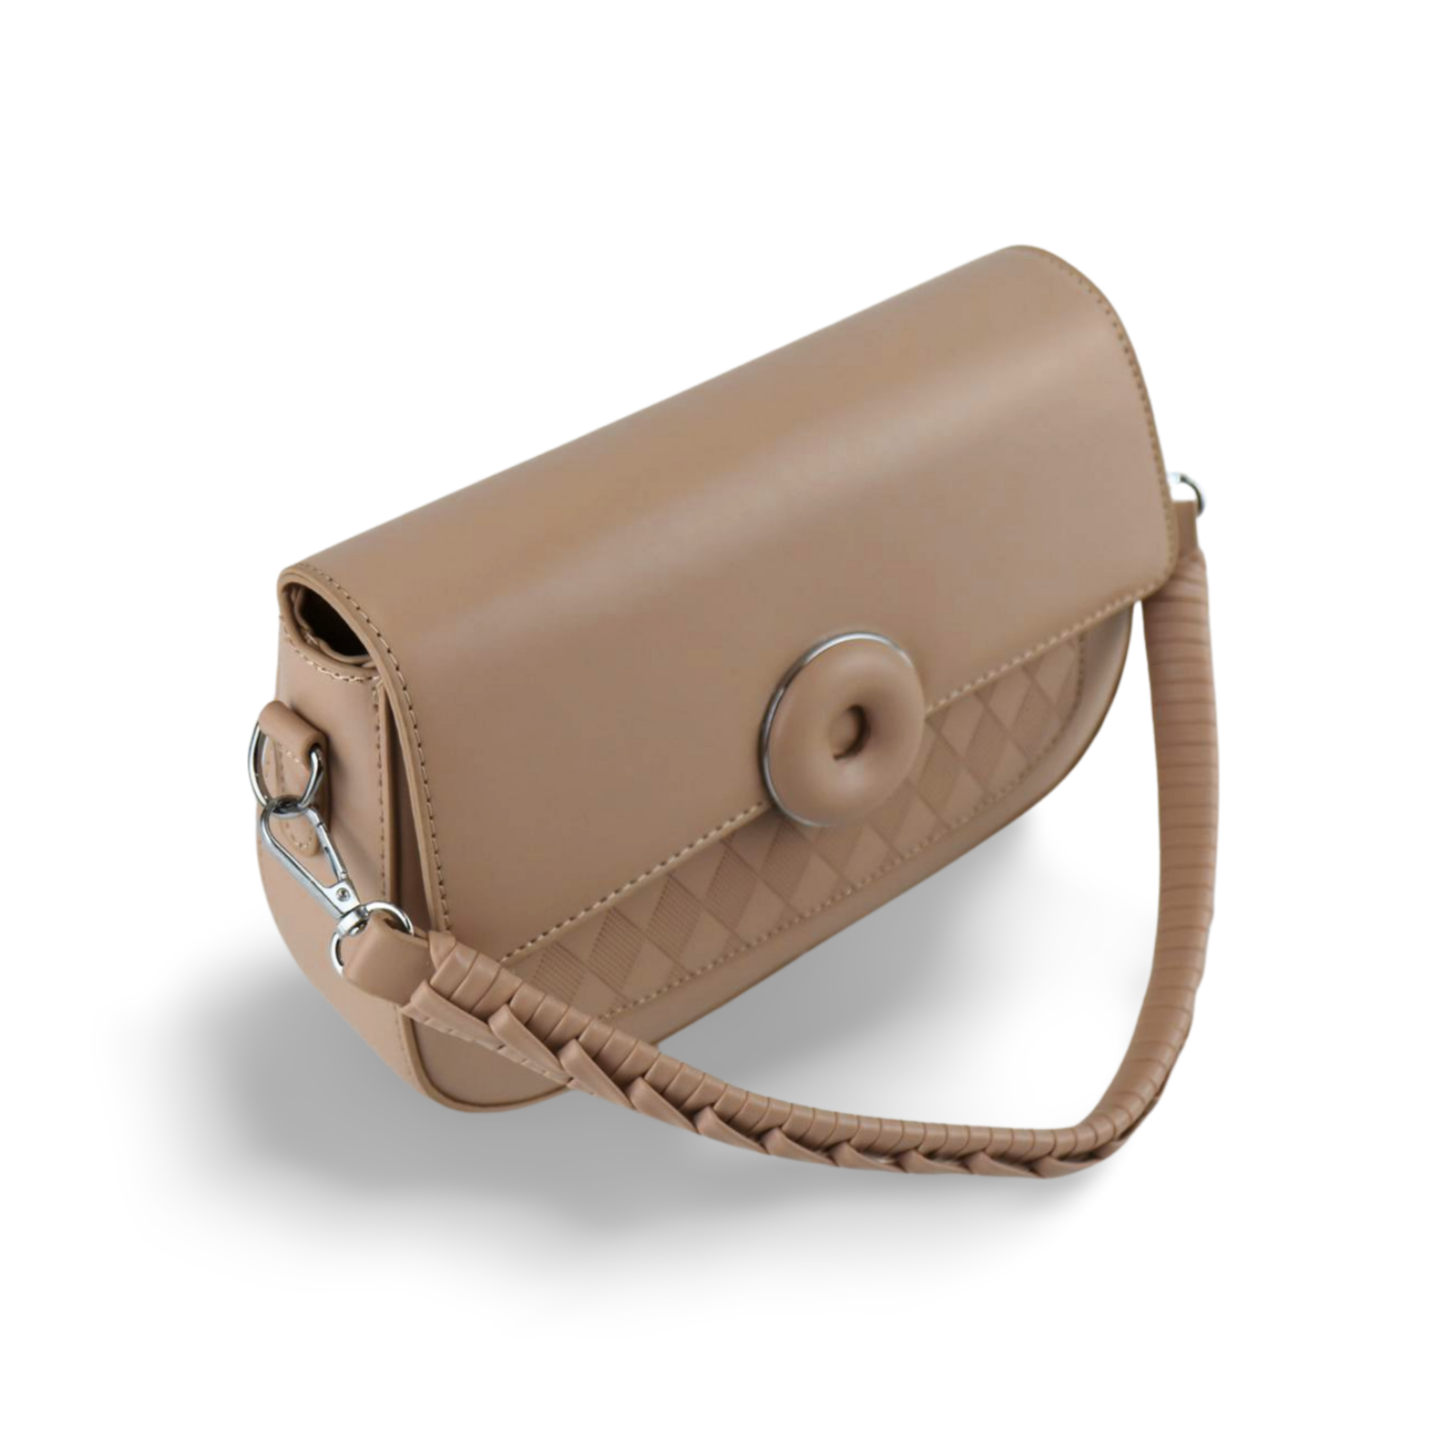 Crossbody Bag with Braided Strap and Ring Detail